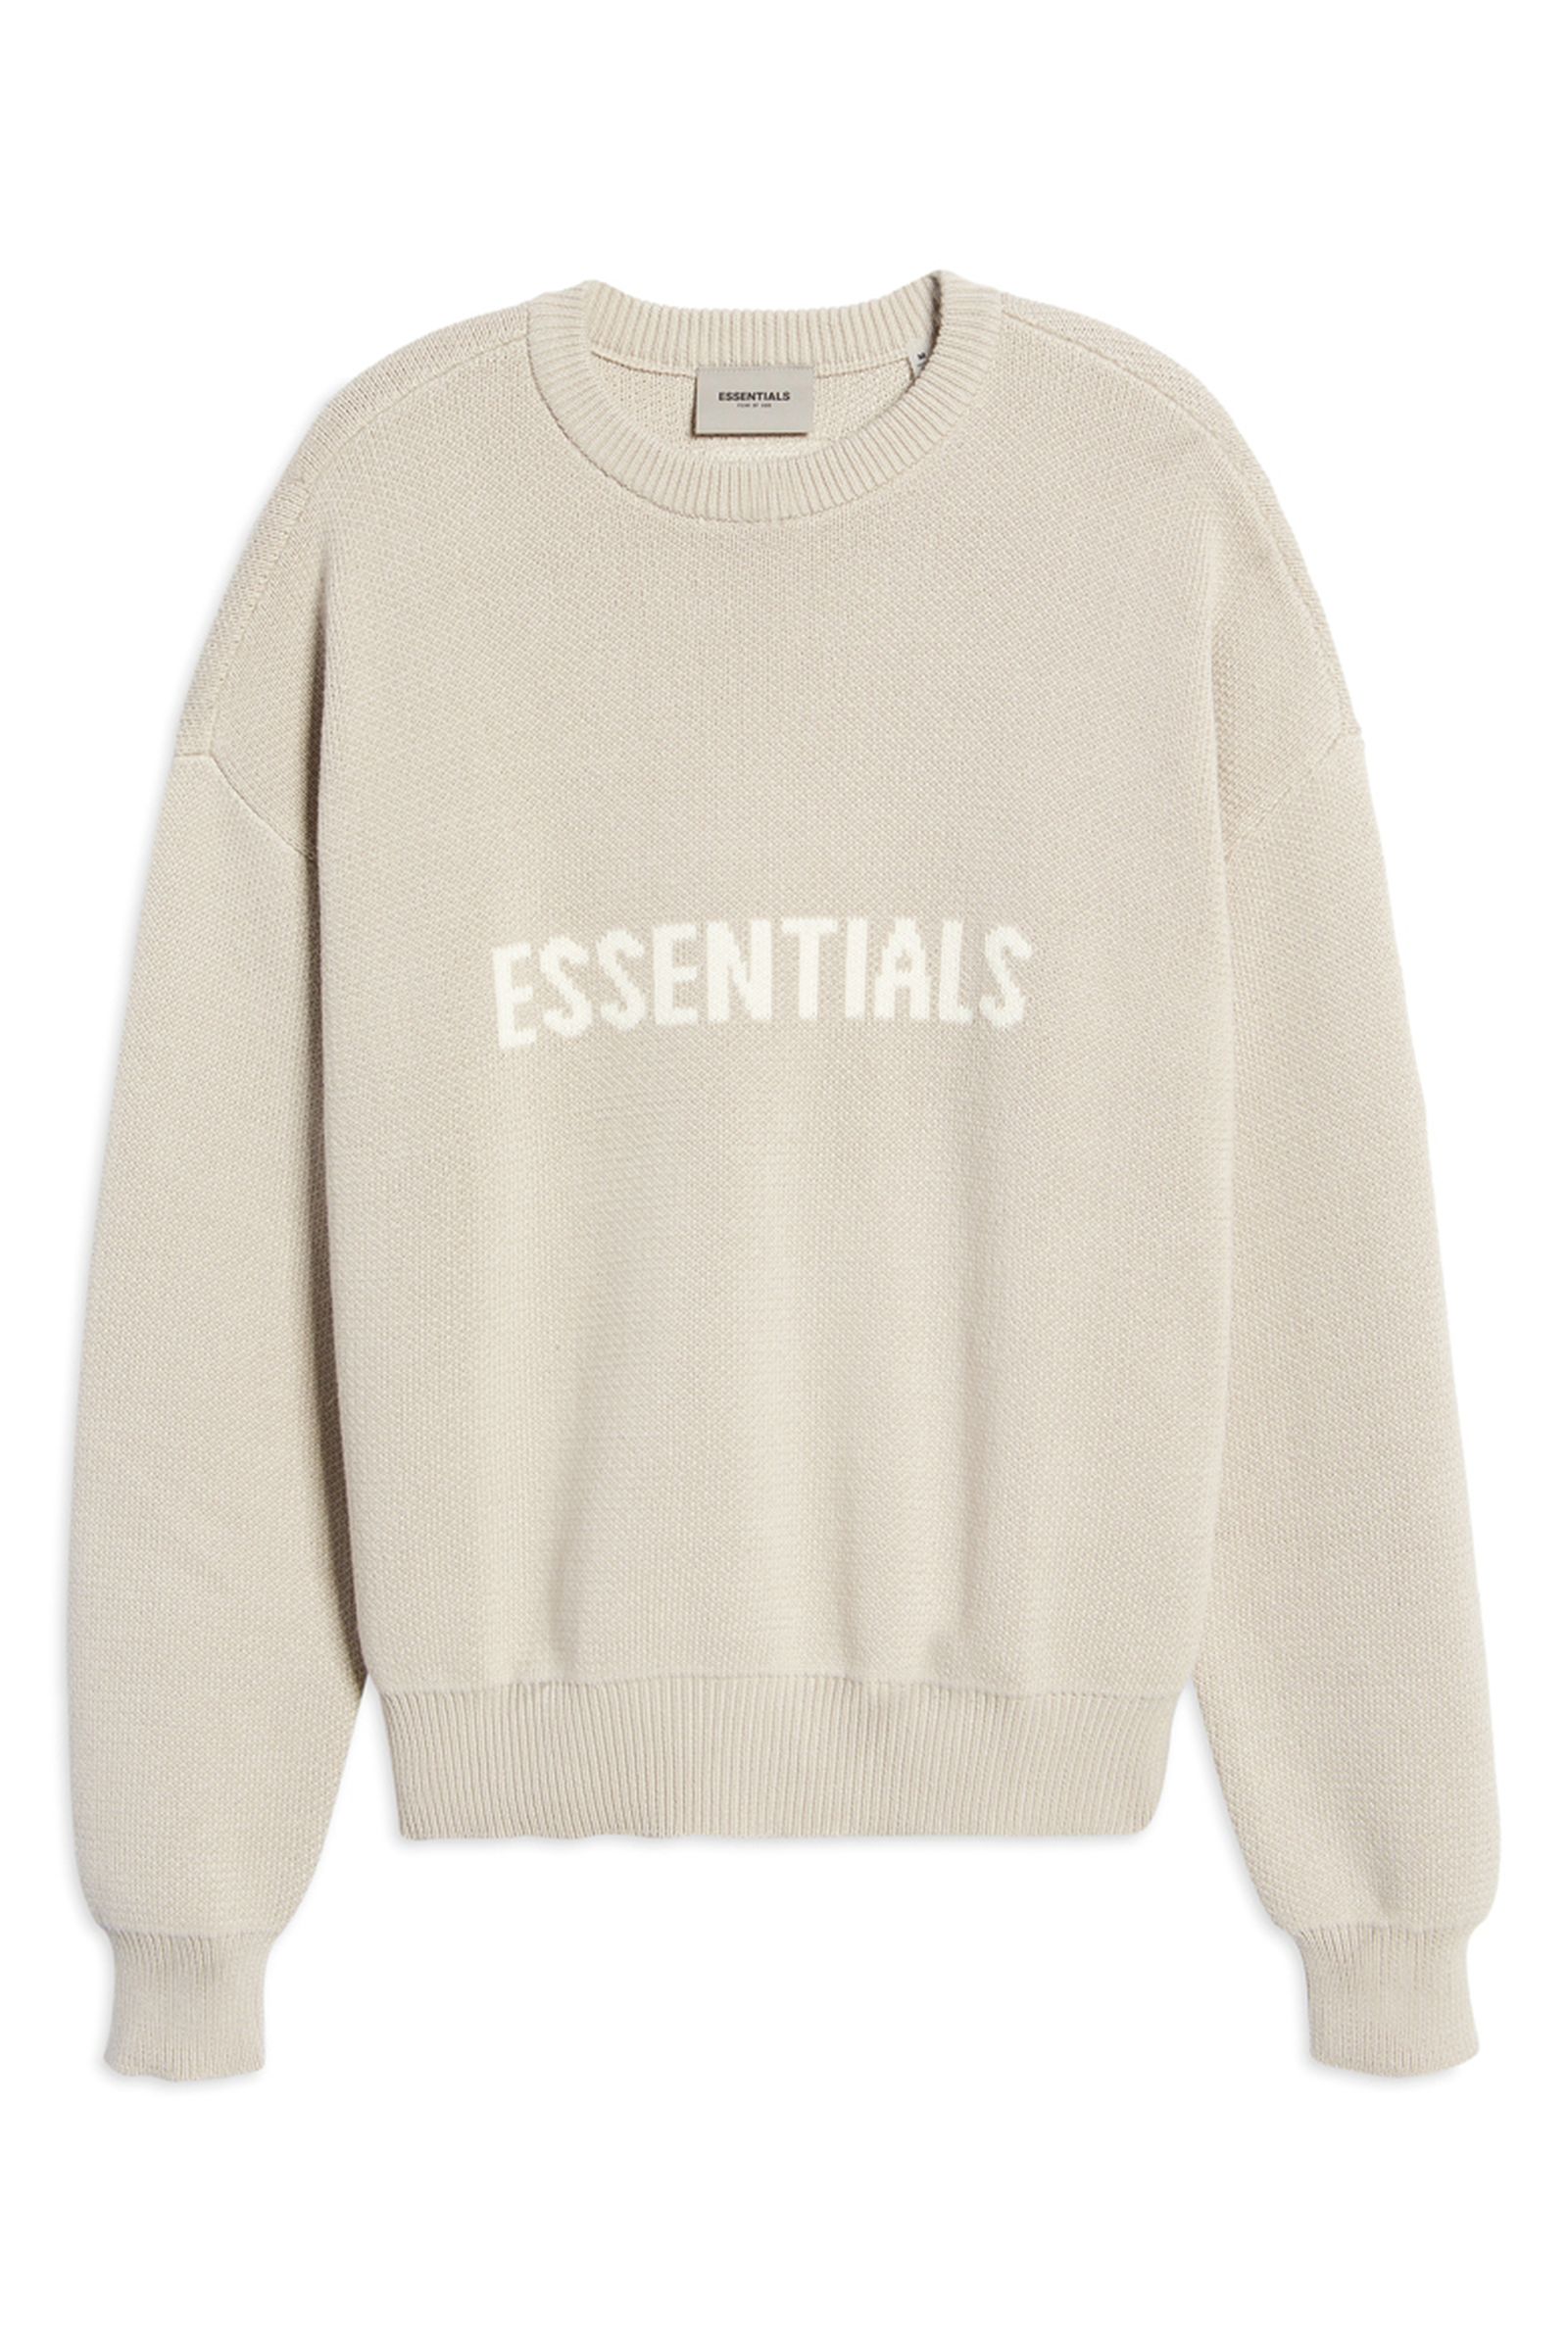 fear of god essentials nordstrom exclusive (5)